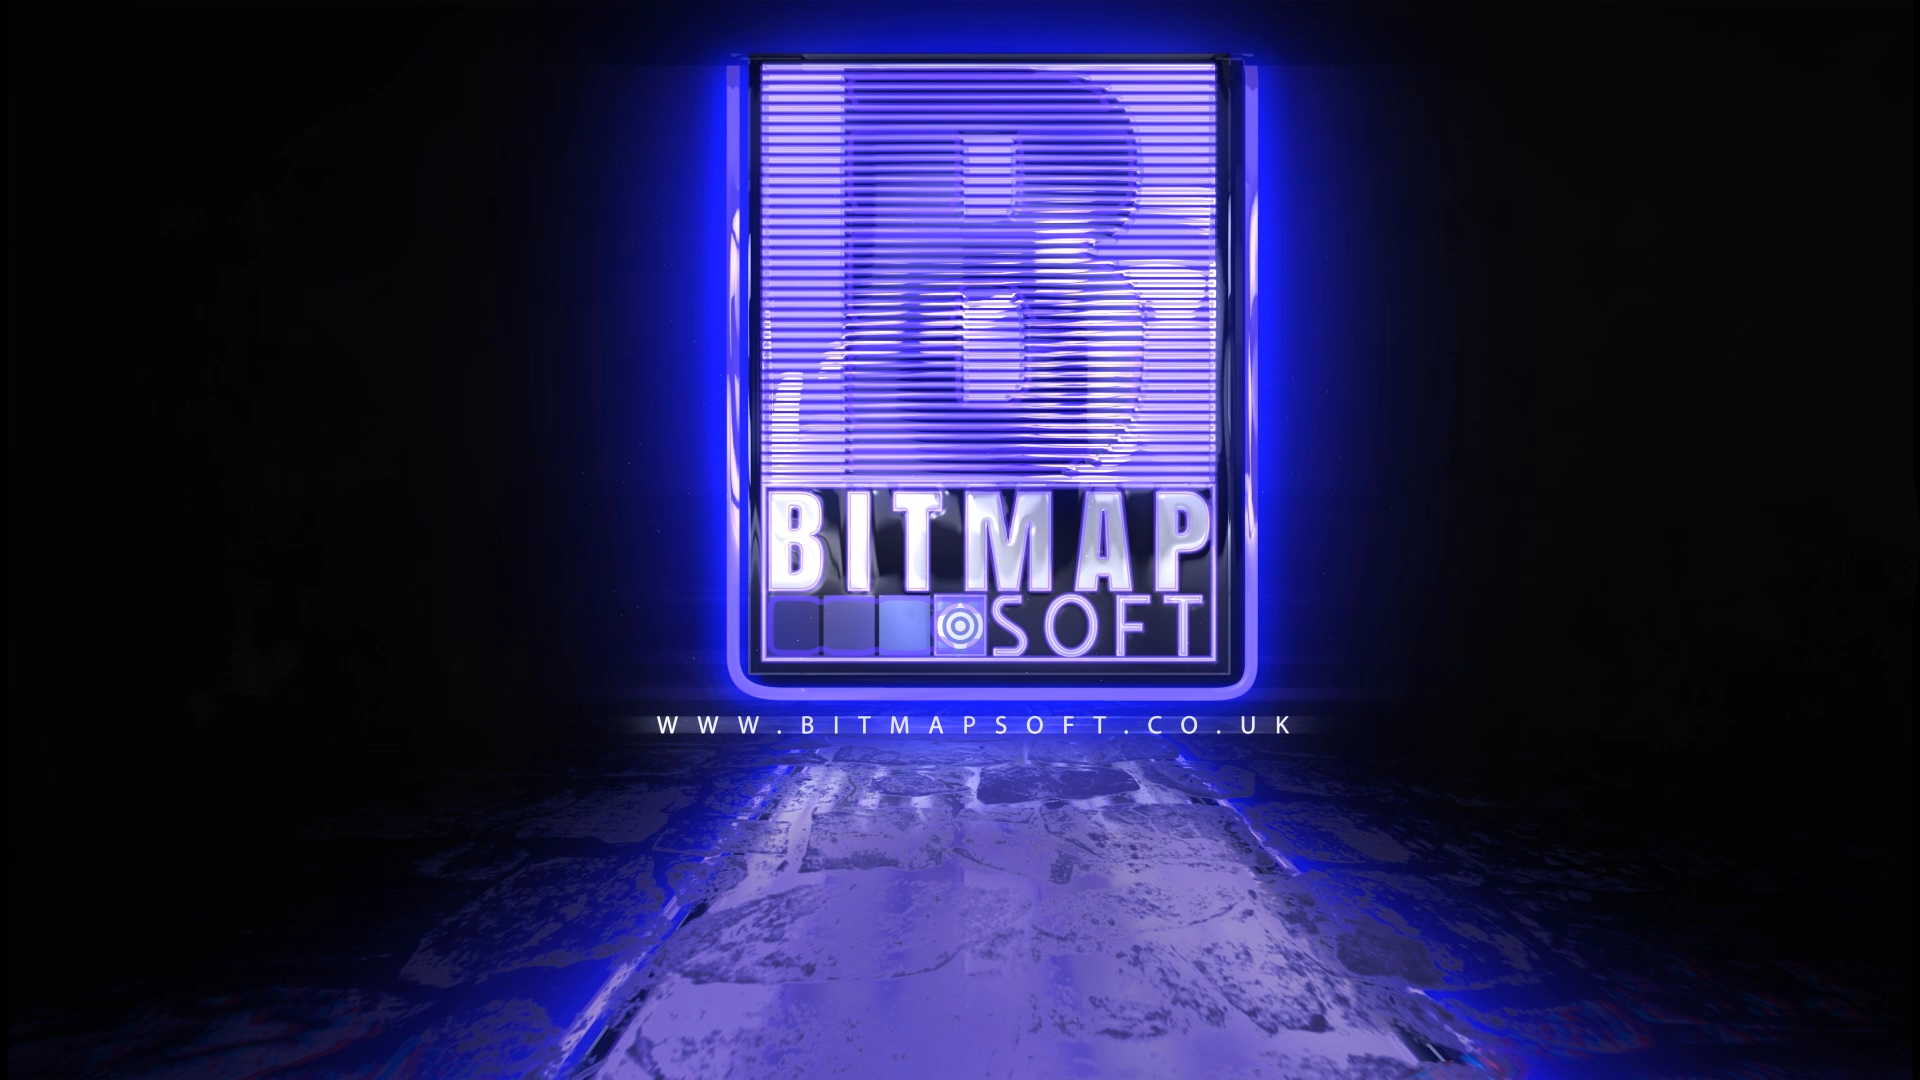 Nope, these are not the Bitmap Brothers! This is BitmapSoft, Darren's new retrogame publishing company.